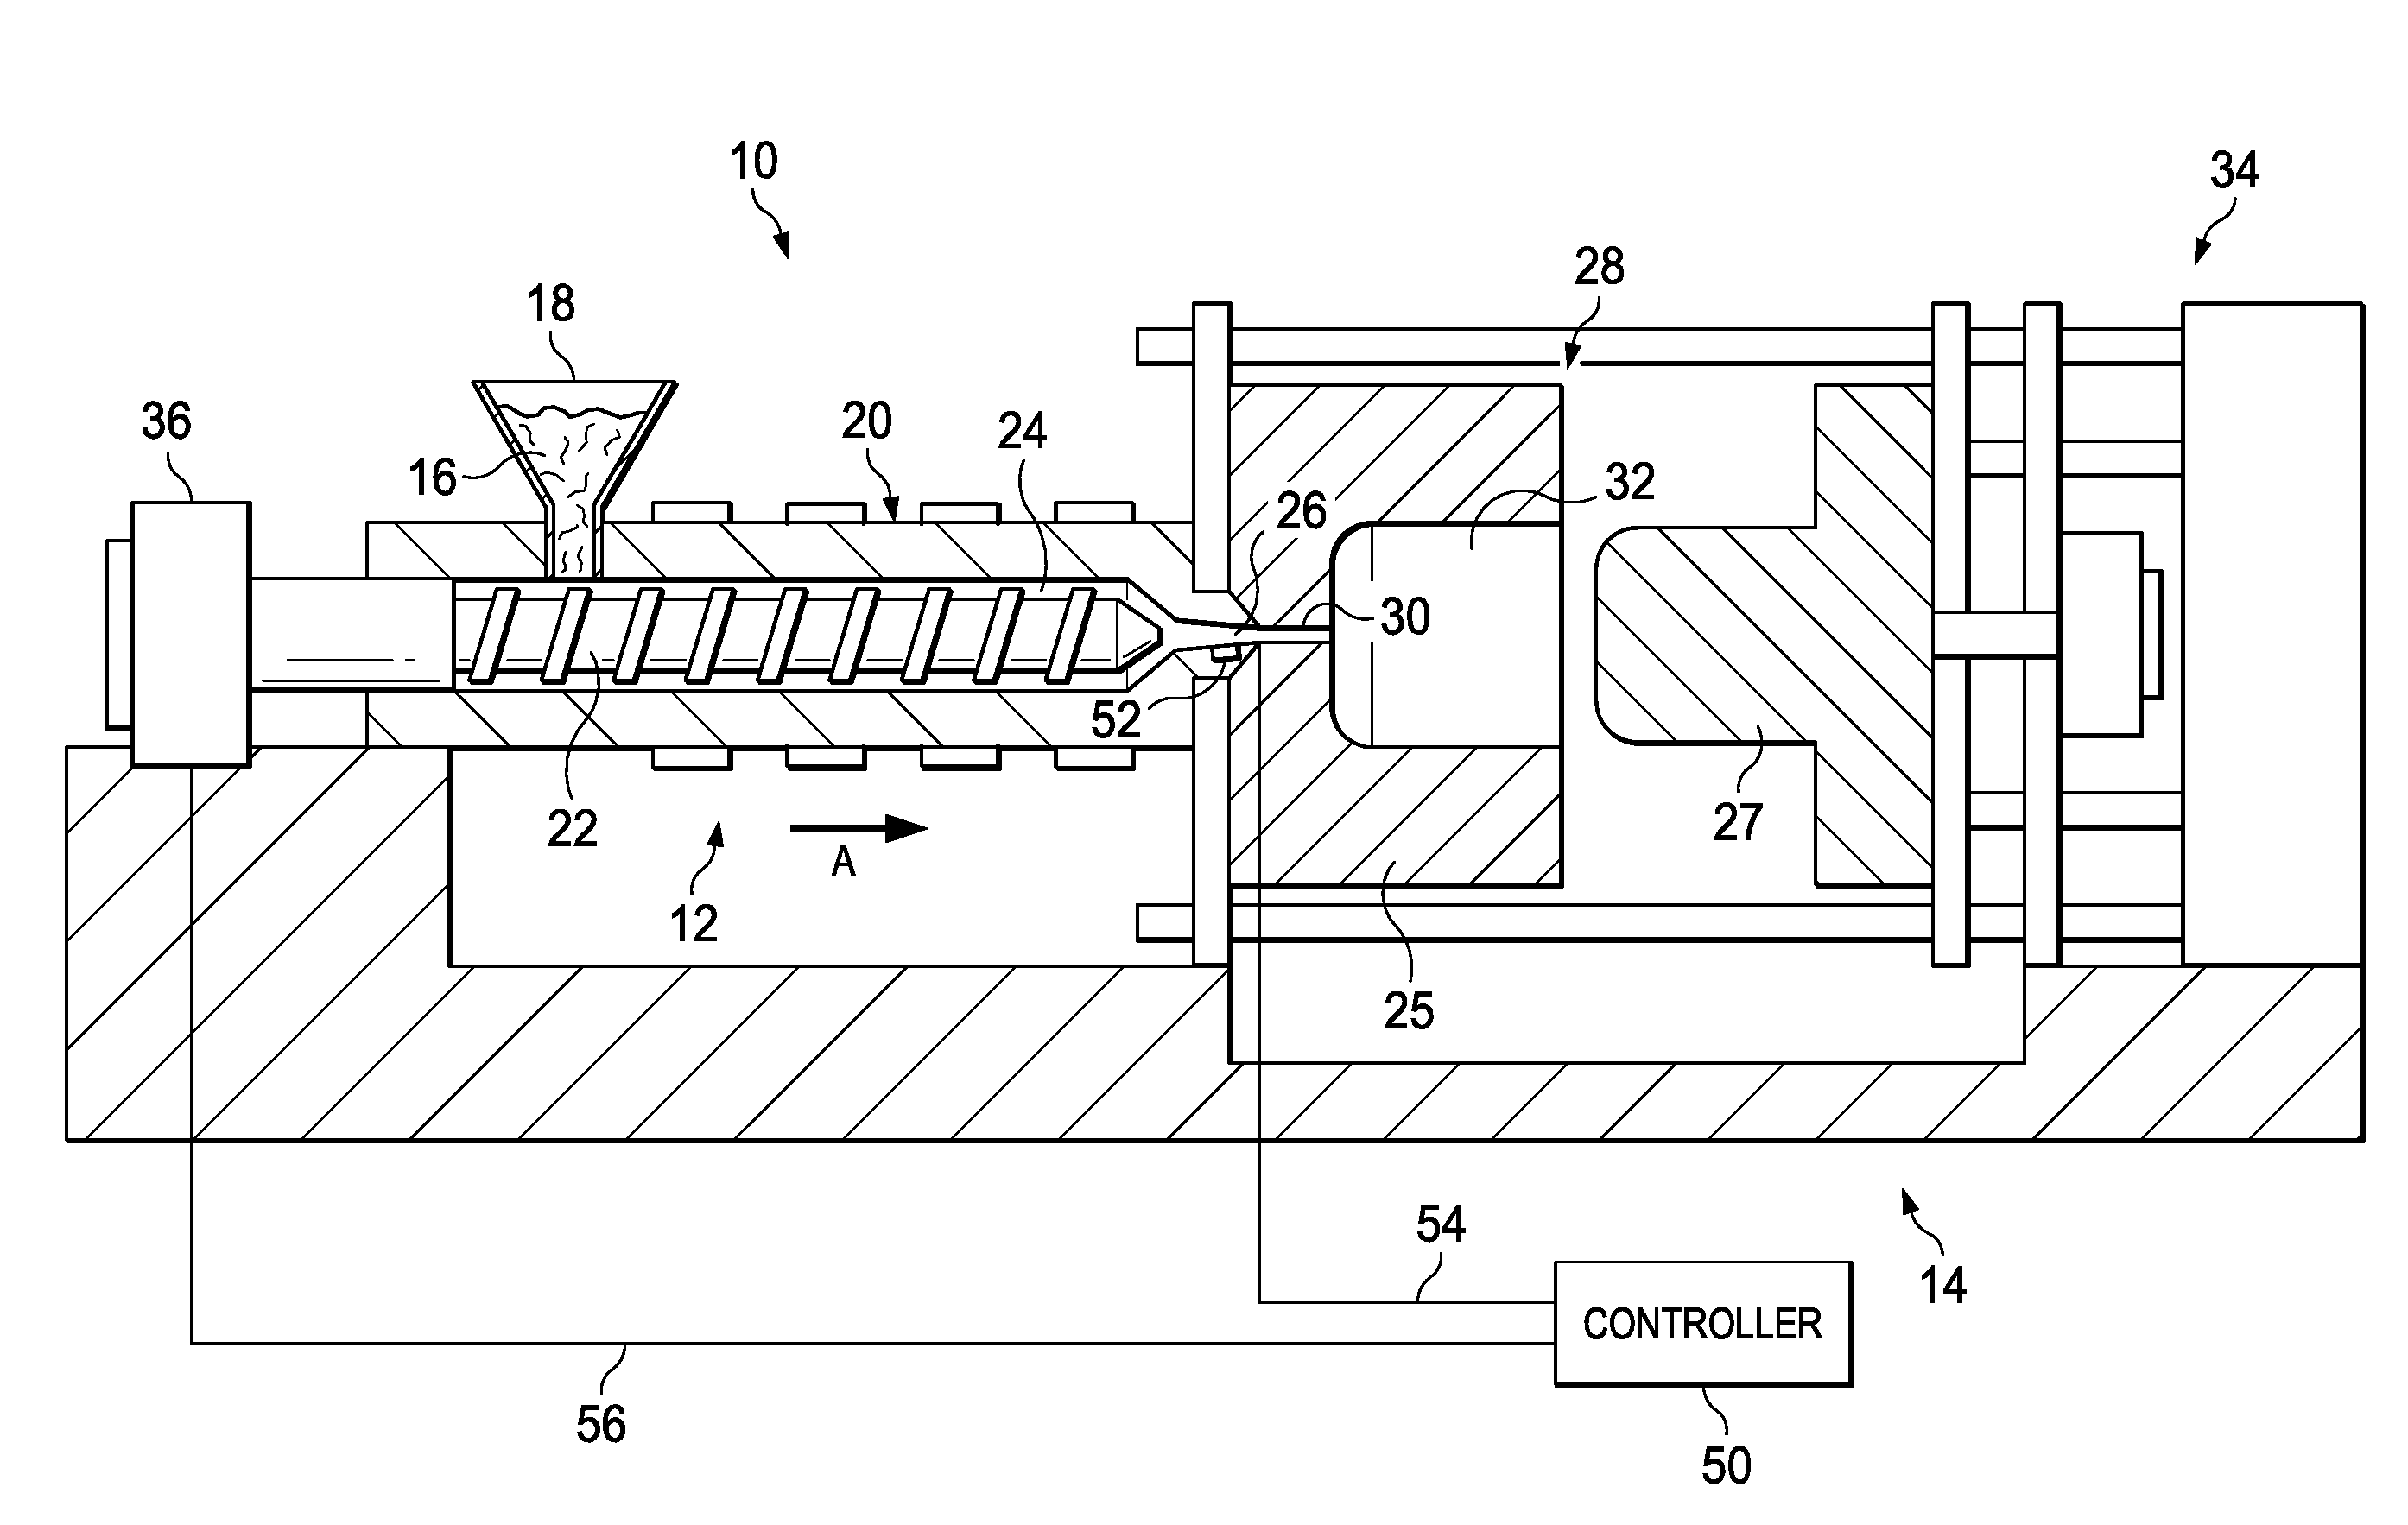 Method of injection molding with constant-velocity flow front control